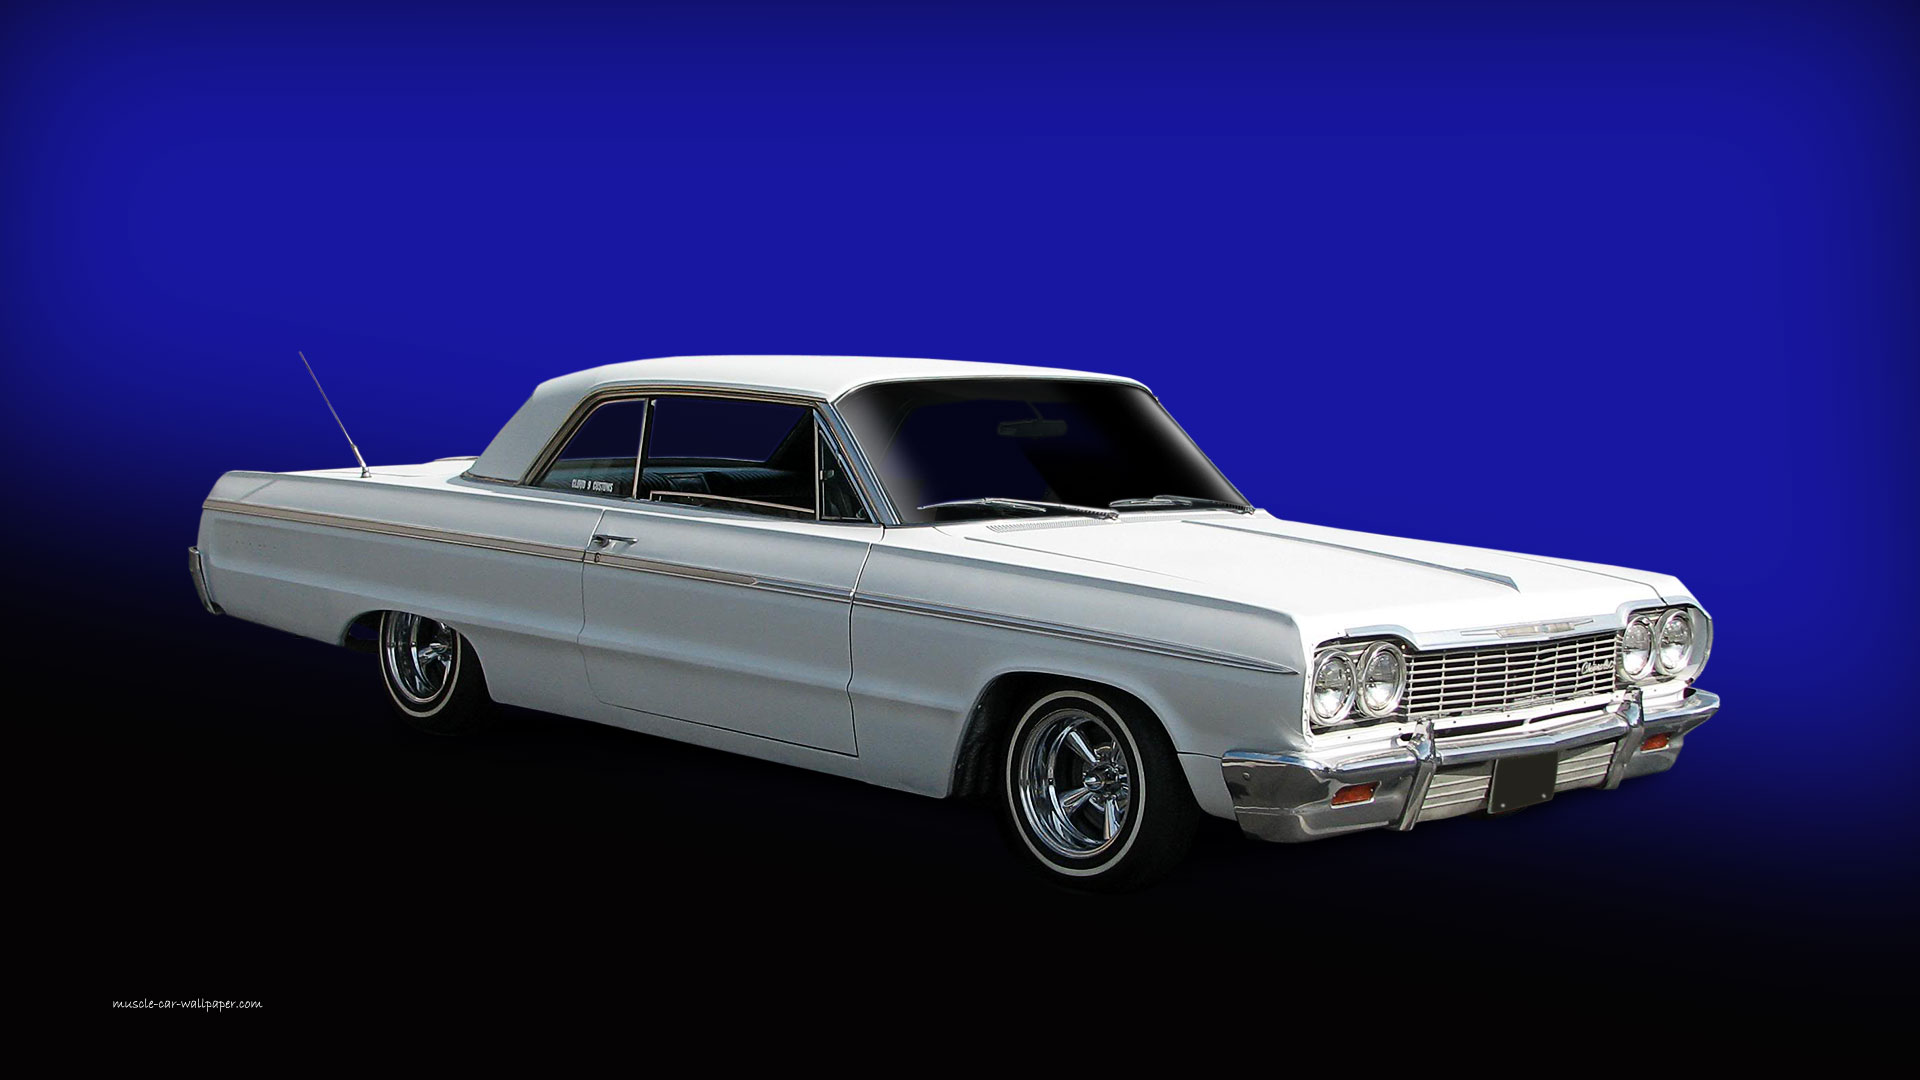 Chevrolet Impala Wallpaper Picture High Resolution 1920